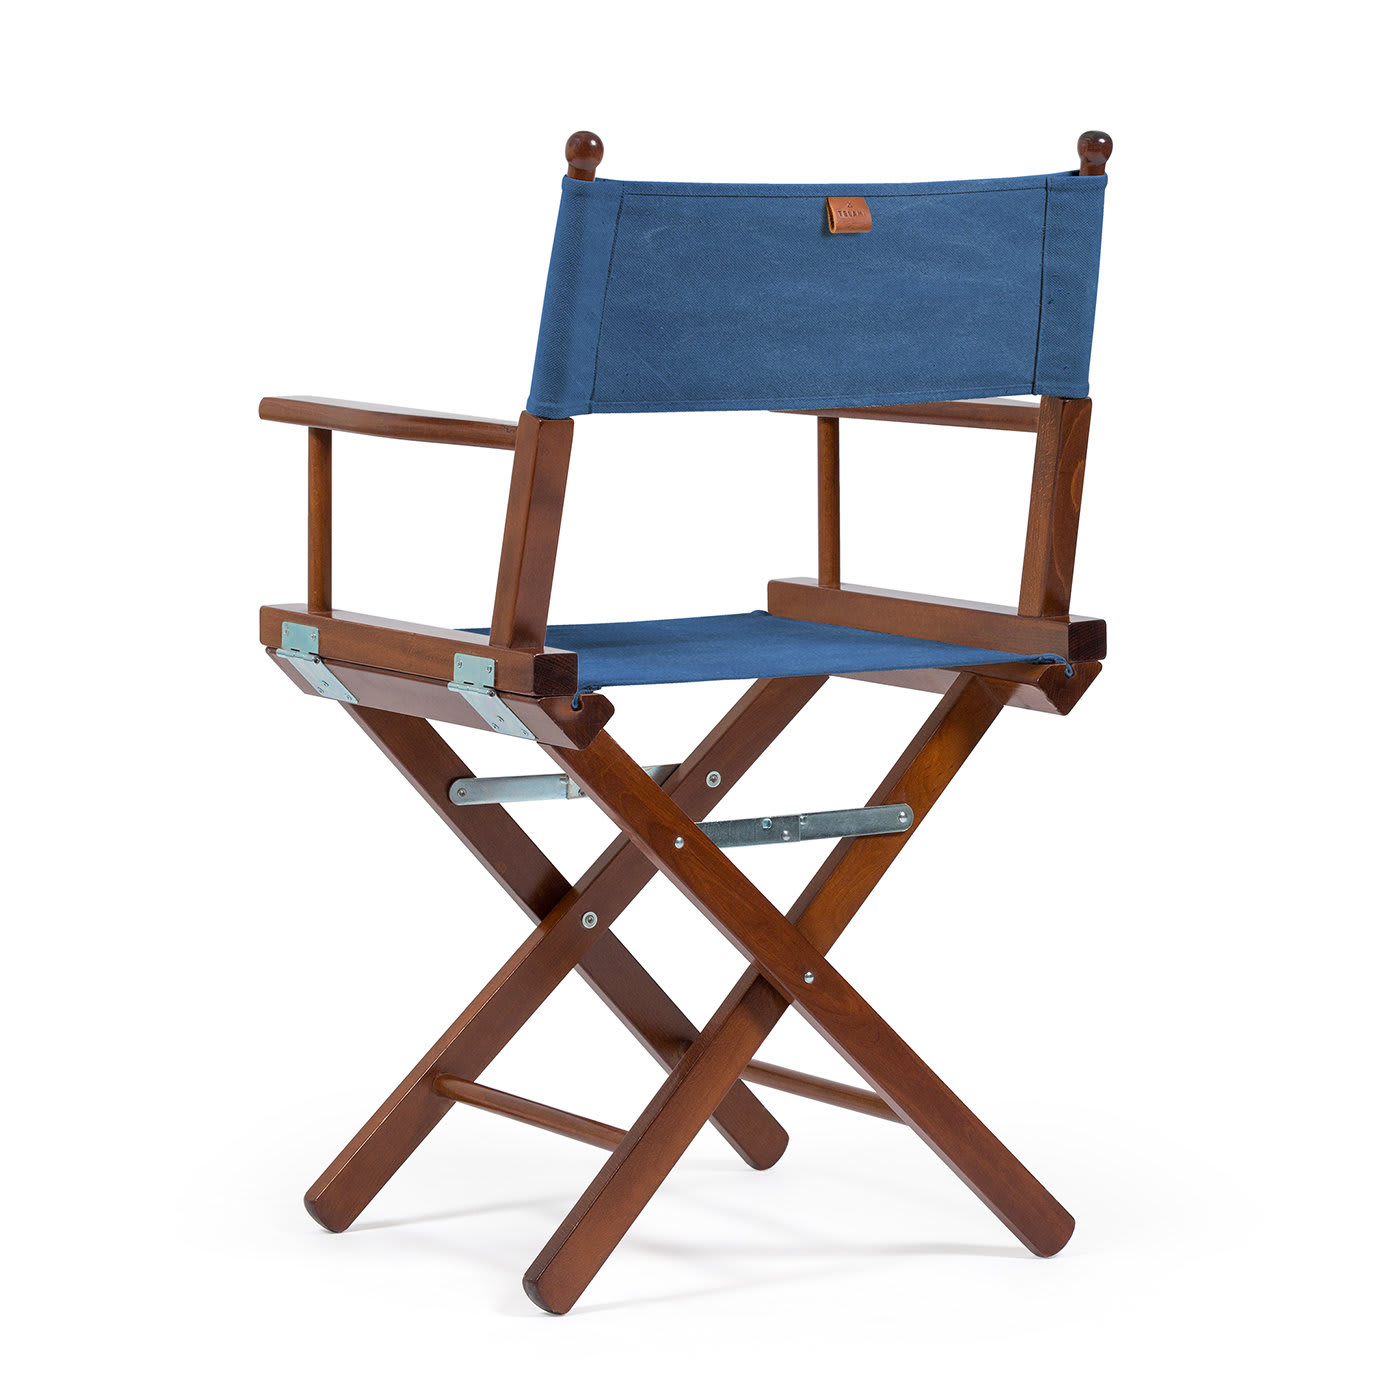 Director's Chair in Jeans Blue - Telami